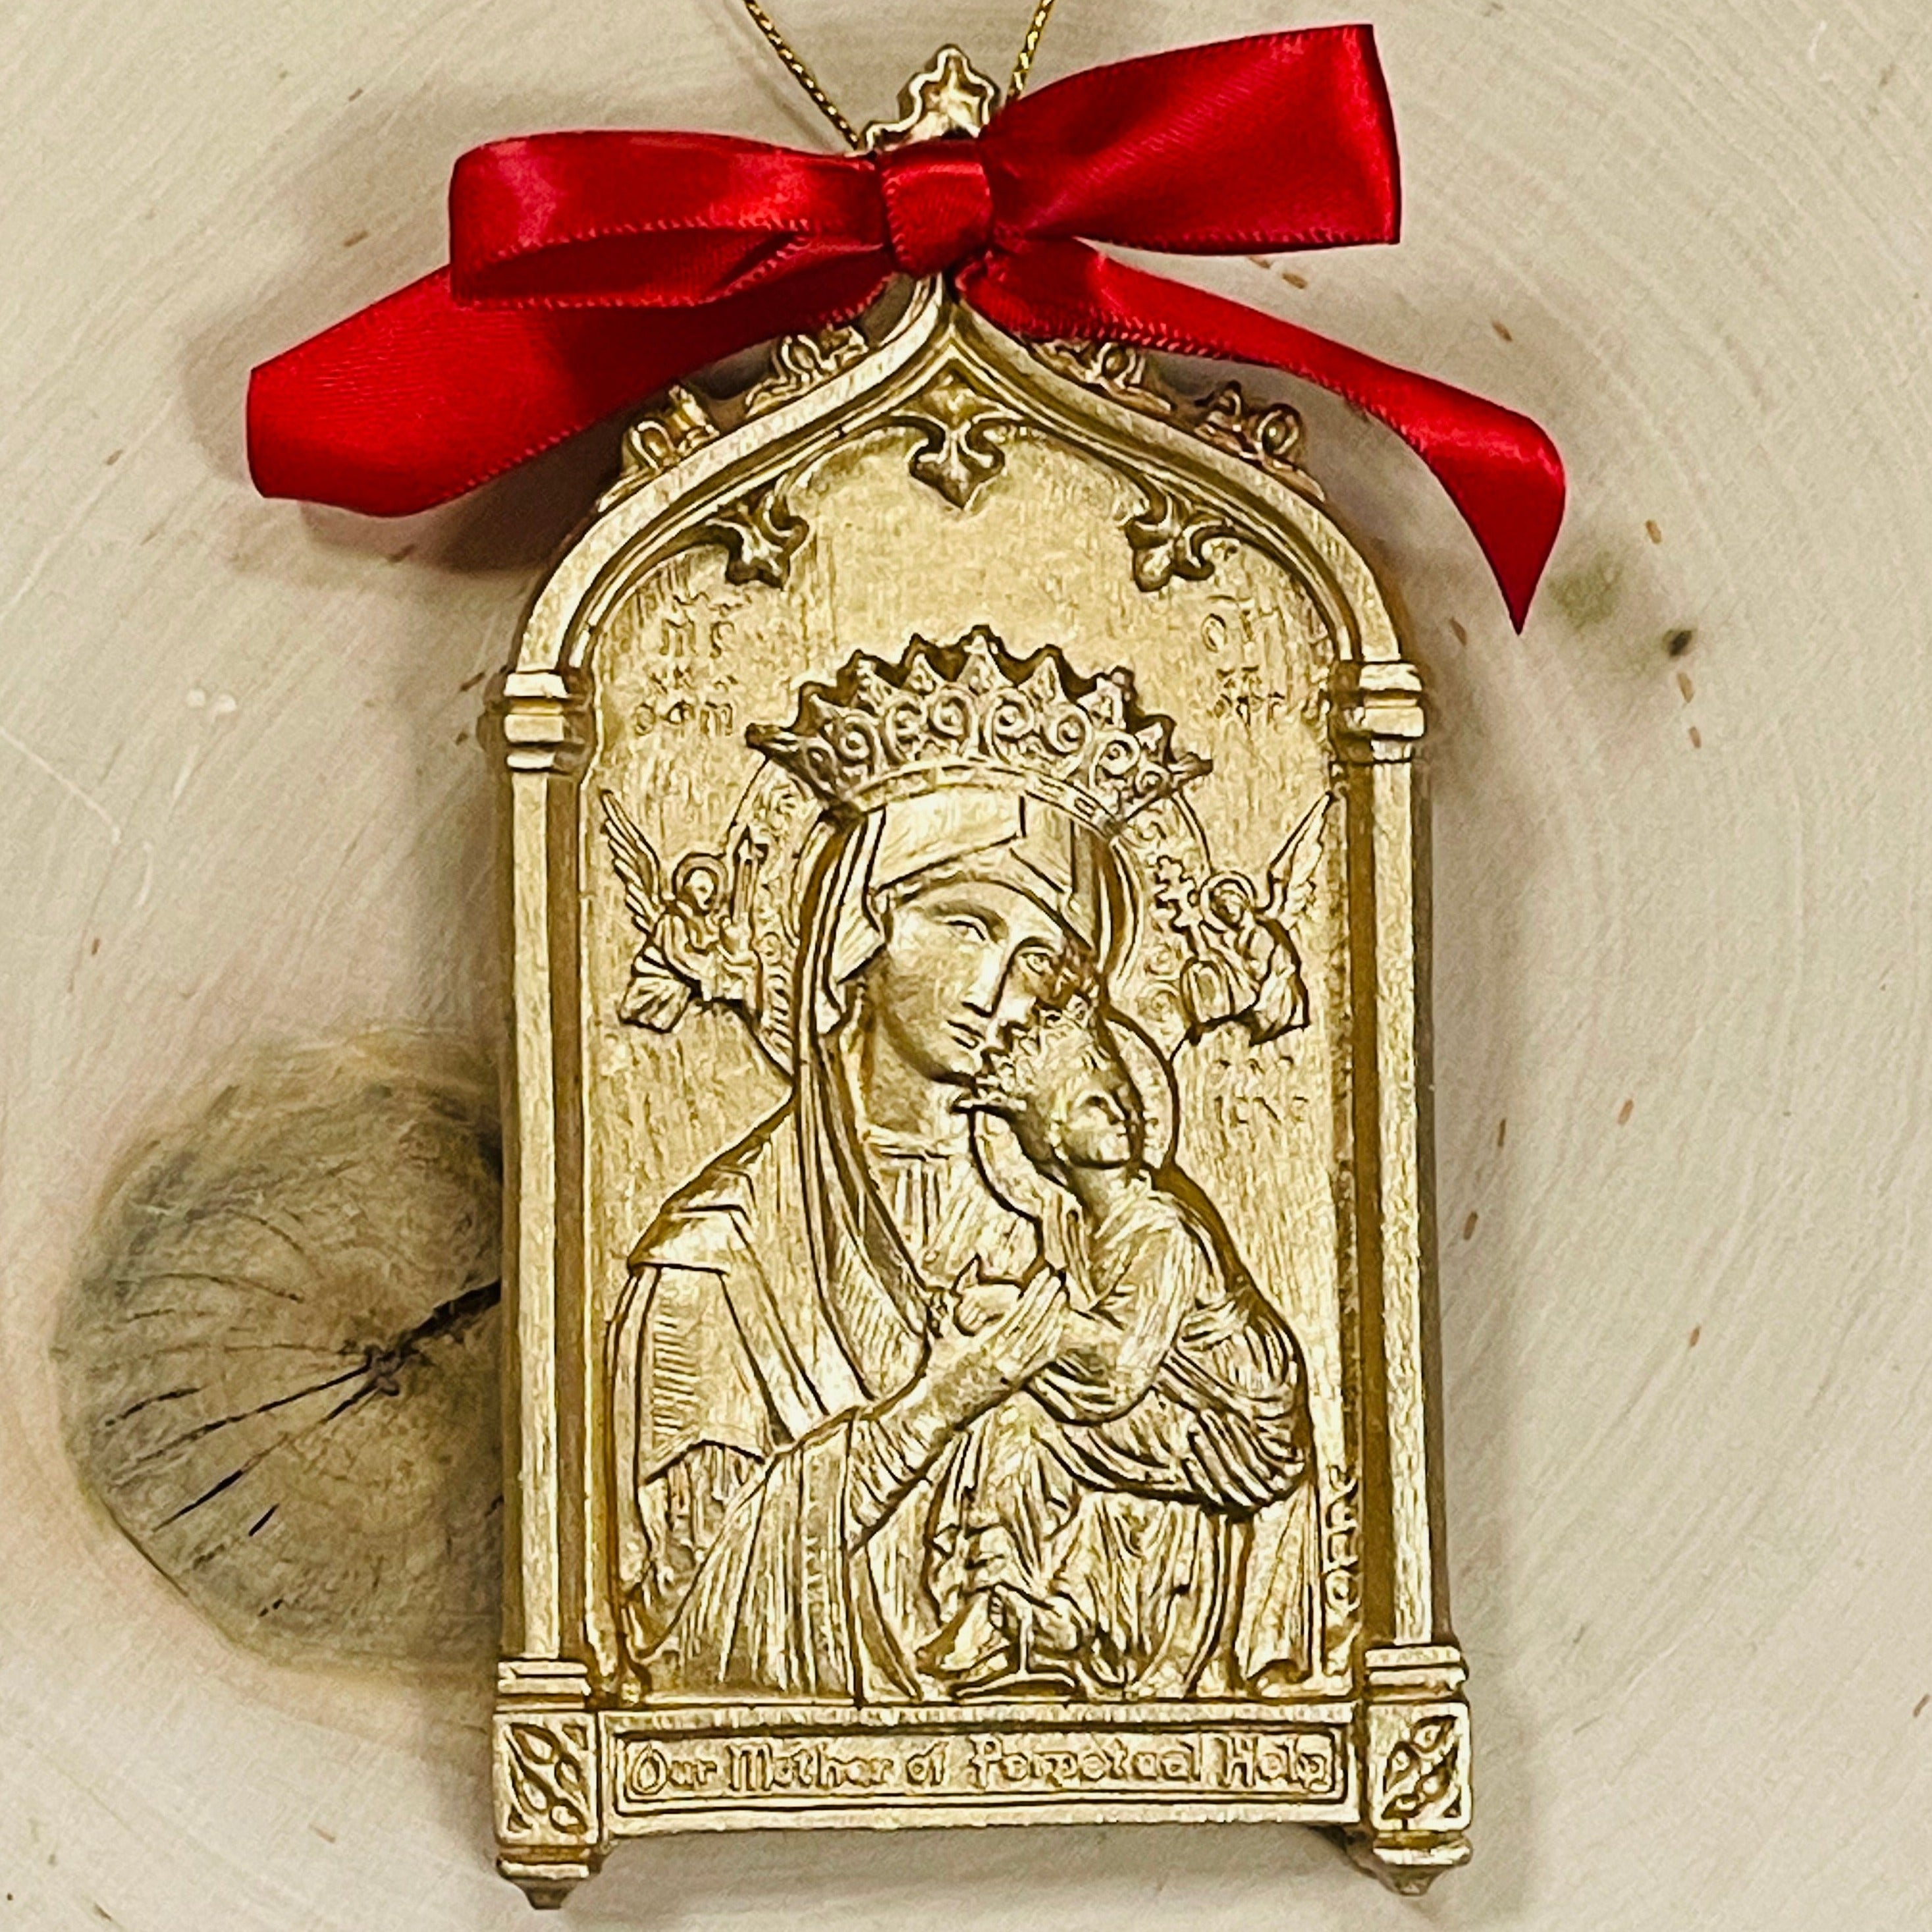 NEW:  Our Lady of Perpetual Help Ornament